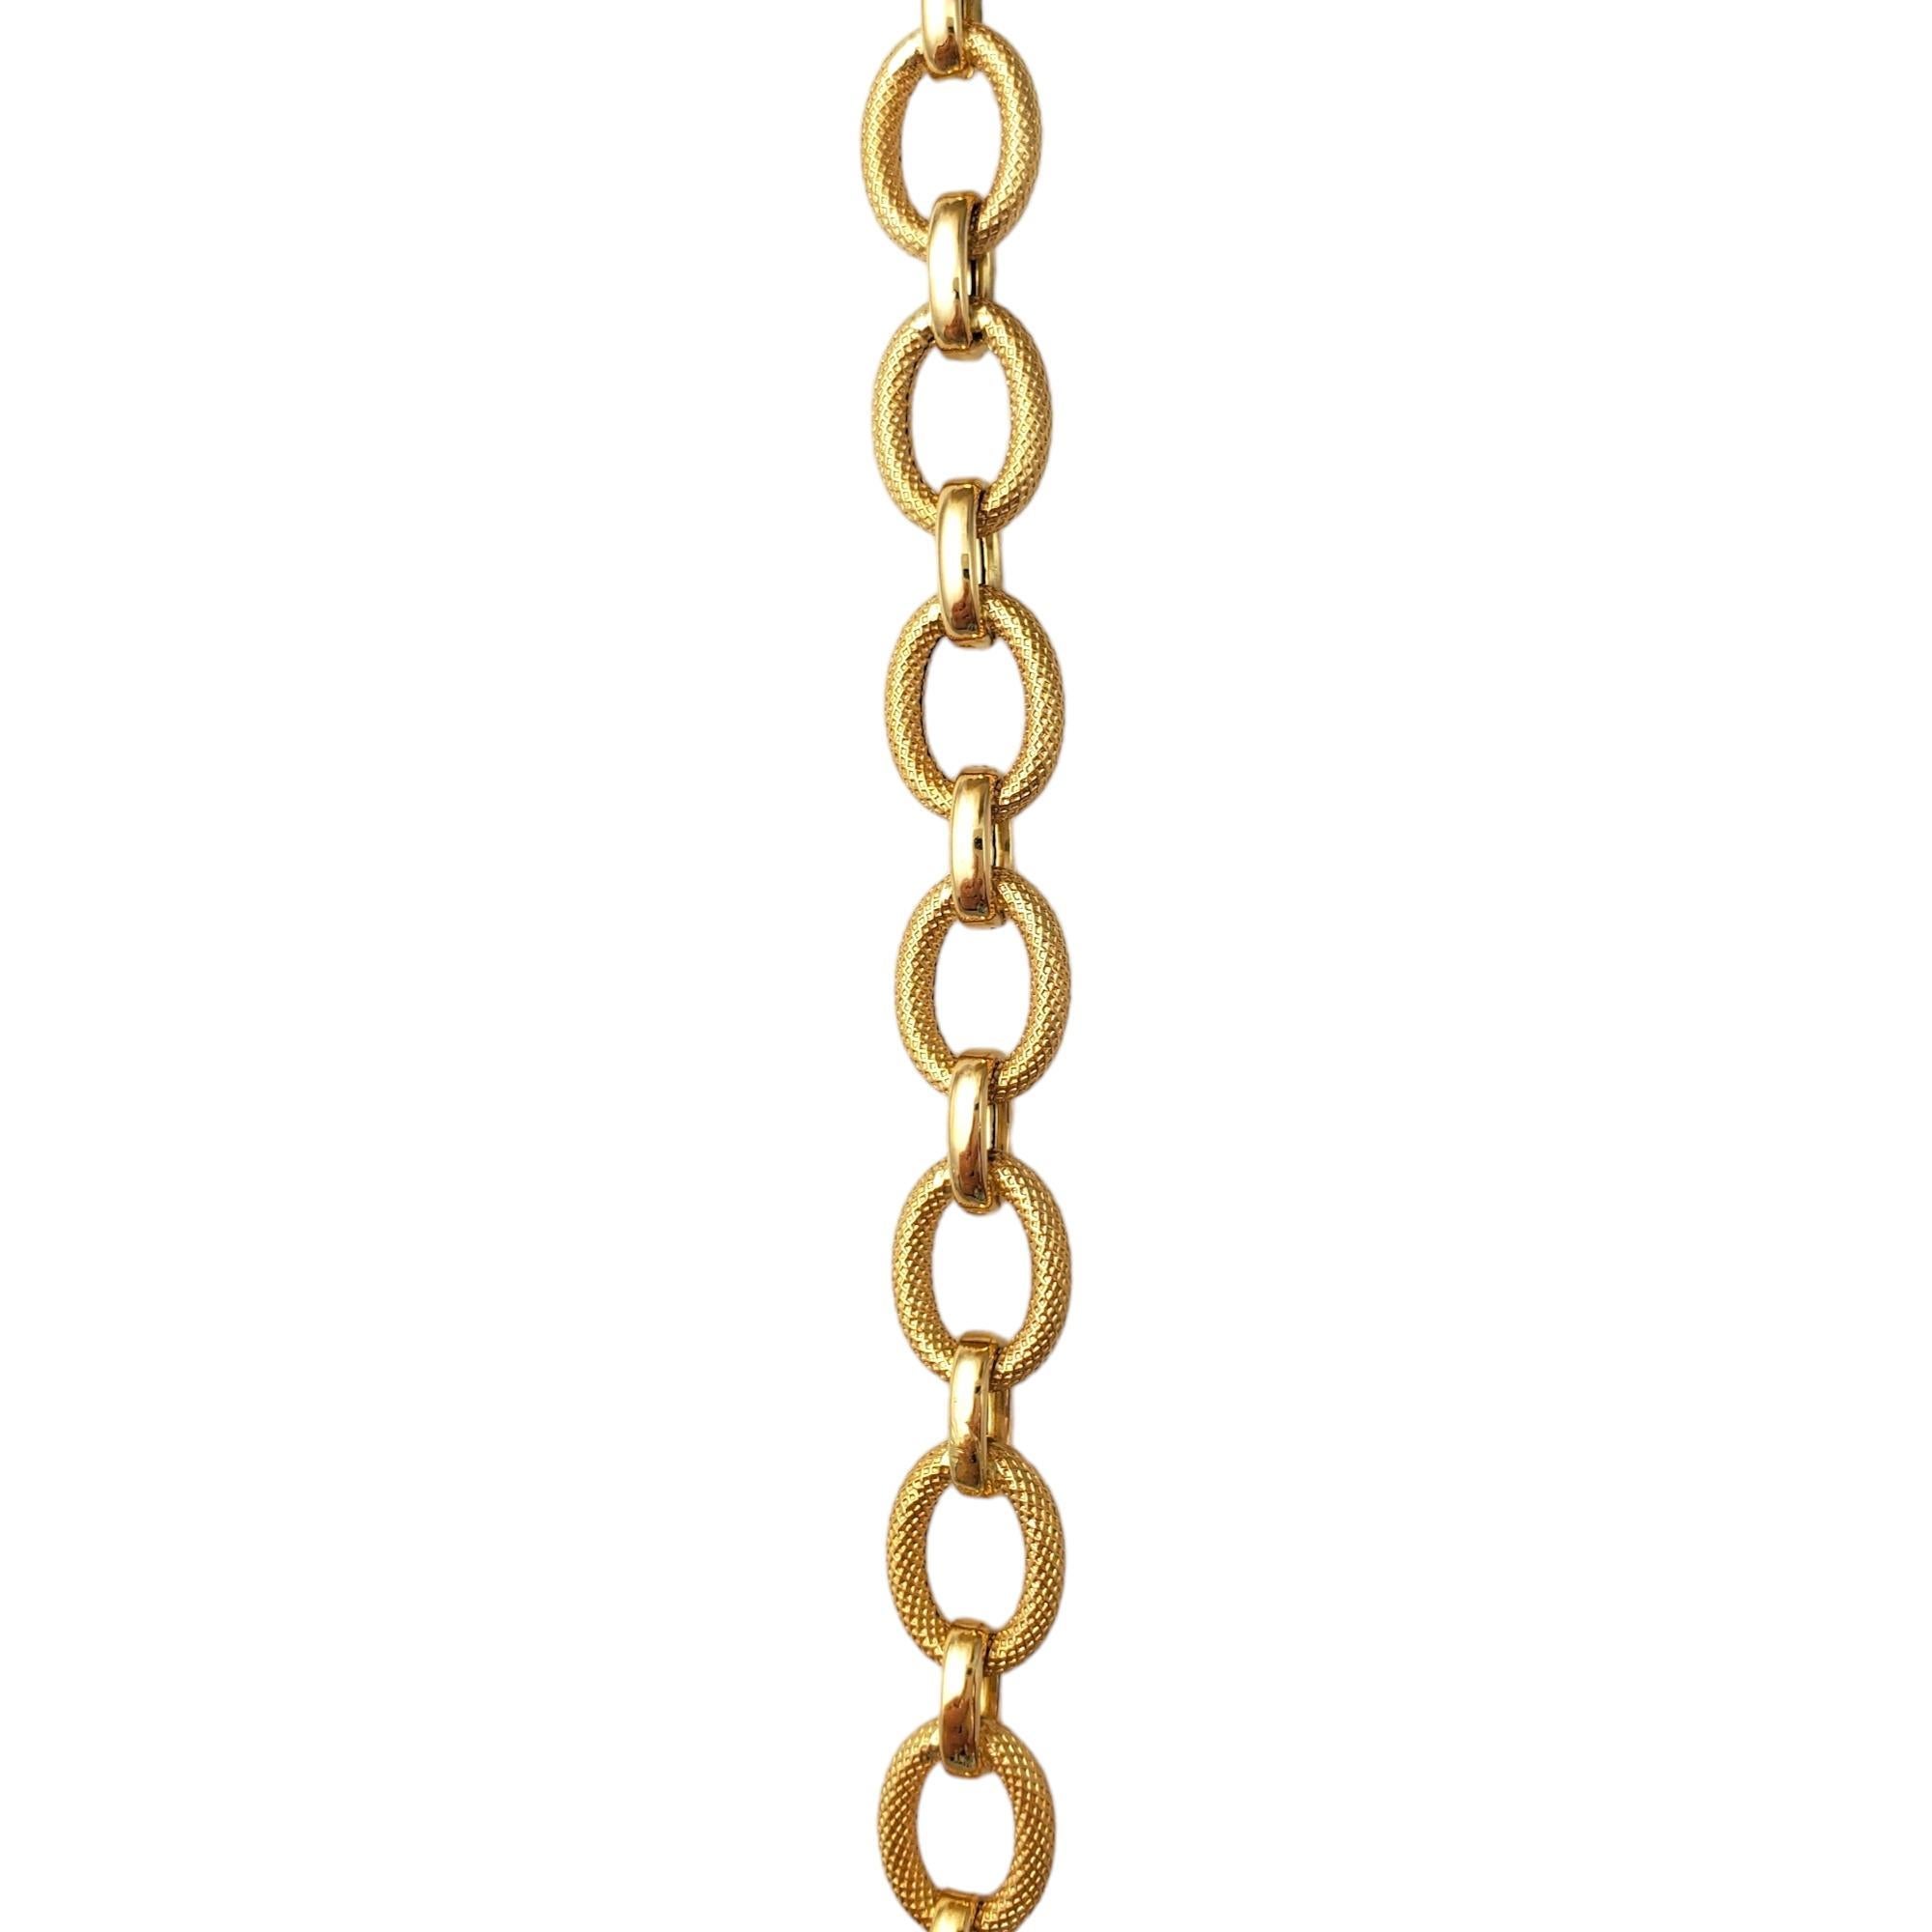 18K Yellow Gold Textured Link Chain Bracelet #16516 In Good Condition For Sale In Washington Depot, CT